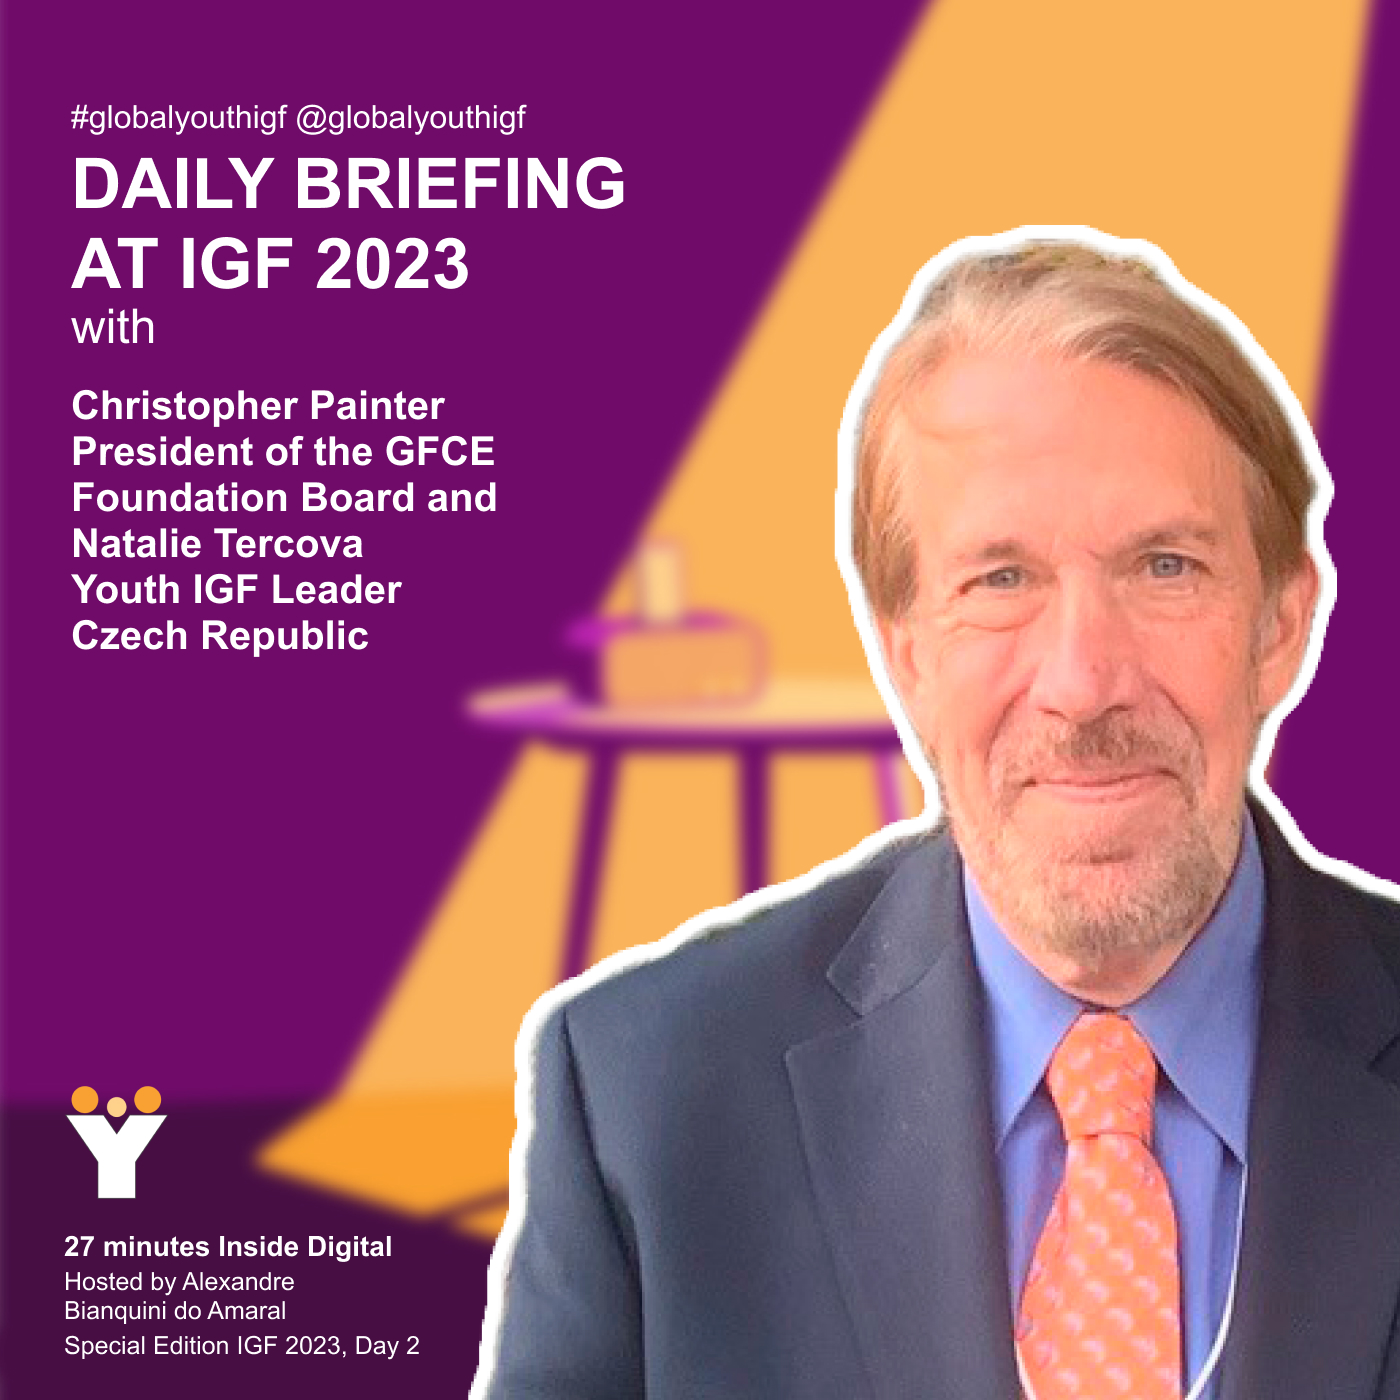 IGF2023: Daily briefing with Christopher Painter